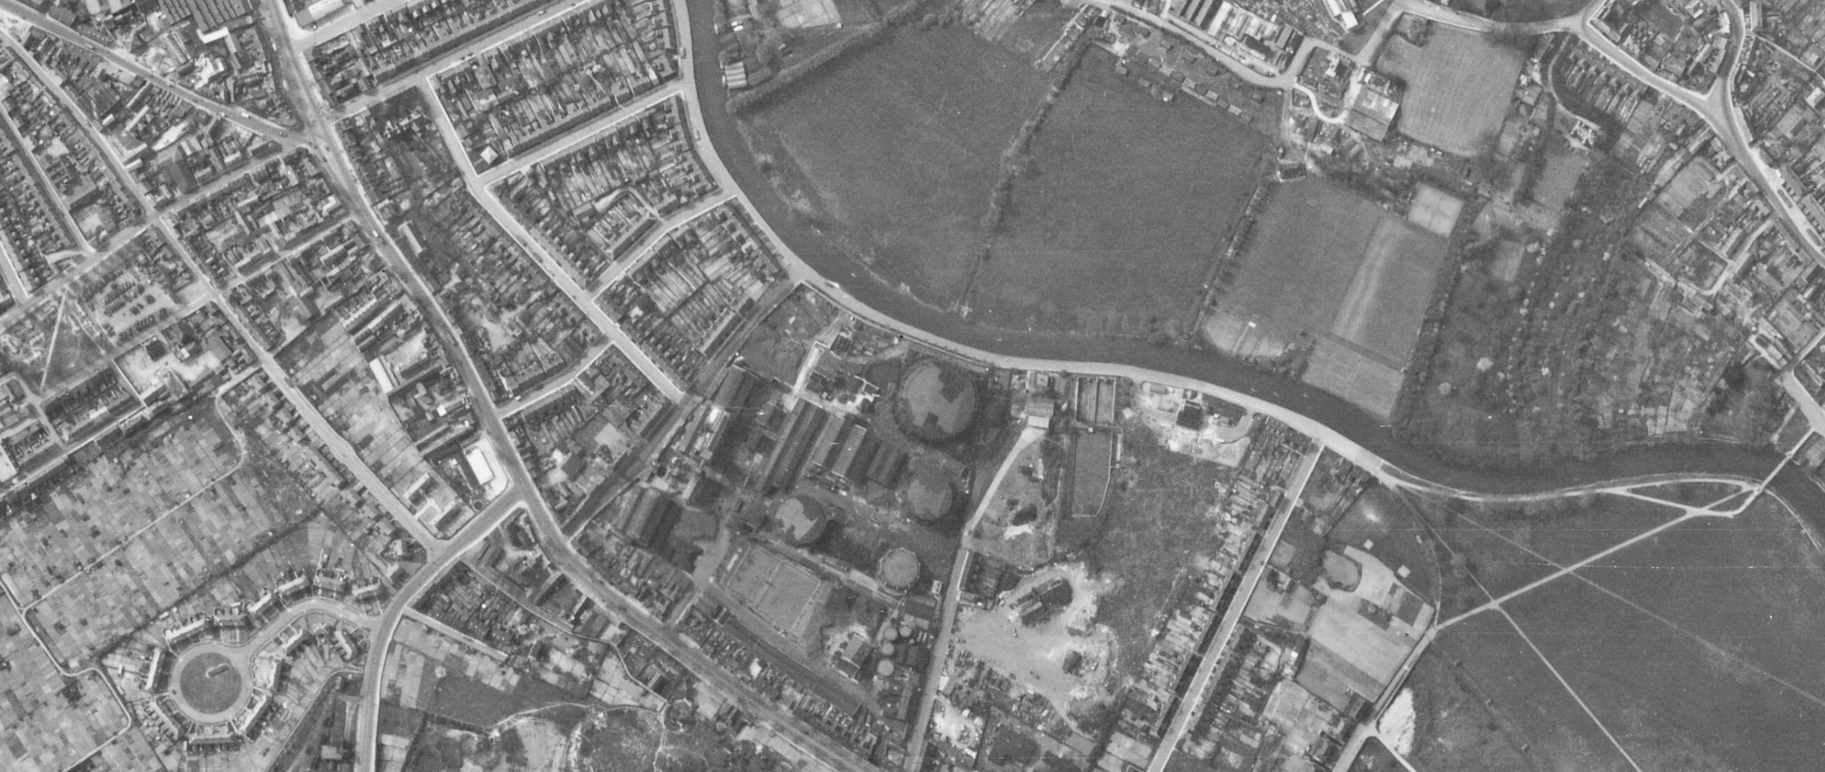 Extract from 1944 aerial photograph of Cambridge (© Historic England, licensed to Cambridge Museum of Technology) showing industrial sites around the railway line.